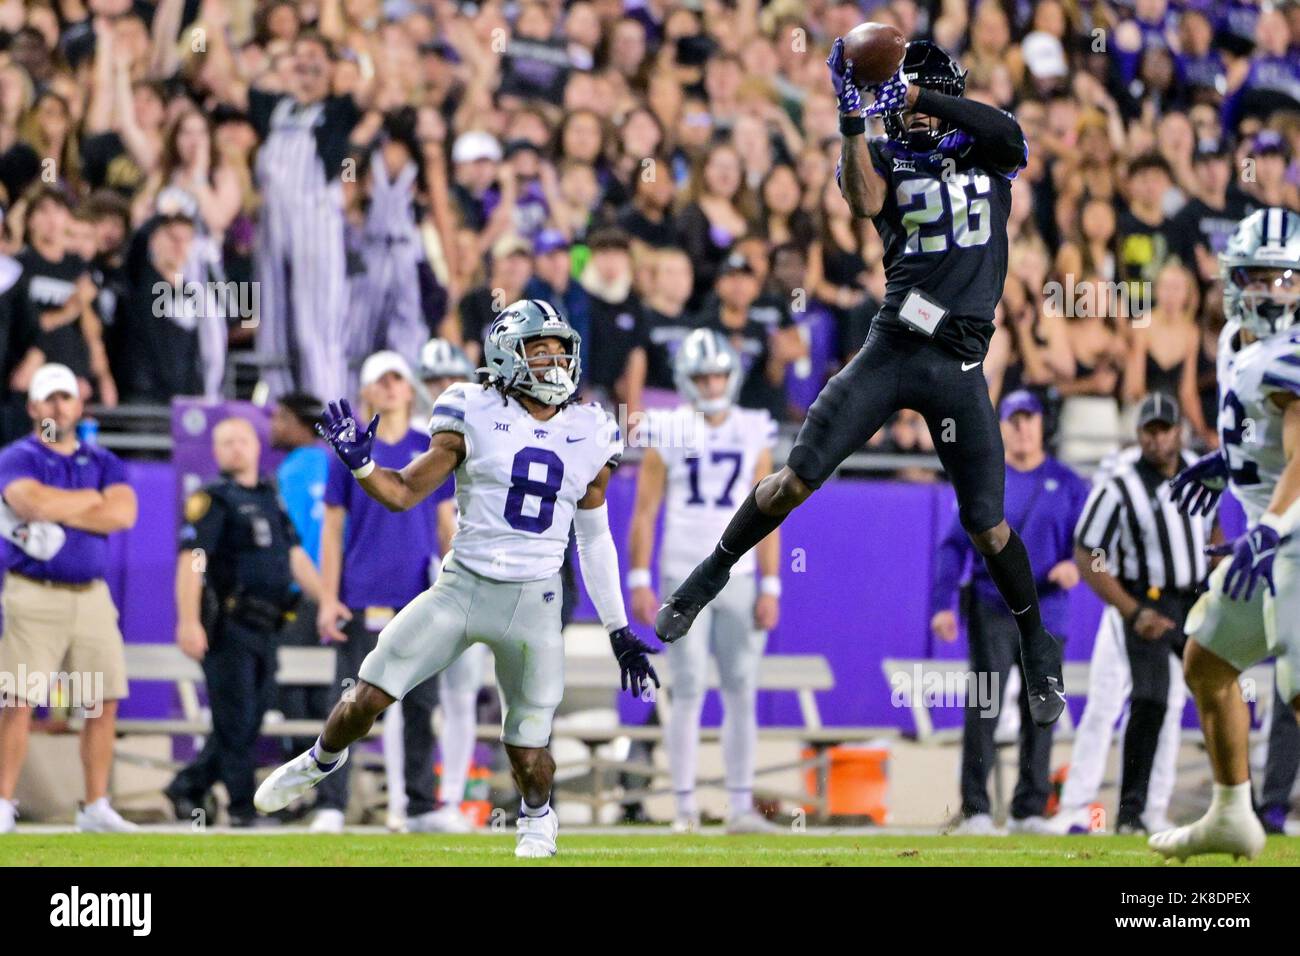 October 22nd 2022: .TCU Horned Frogs safety Bud Clark (26) leaps in the air  for an INT during a NCAA Football game between the Kansas State Wildcats  and TCU Horned Frogs at